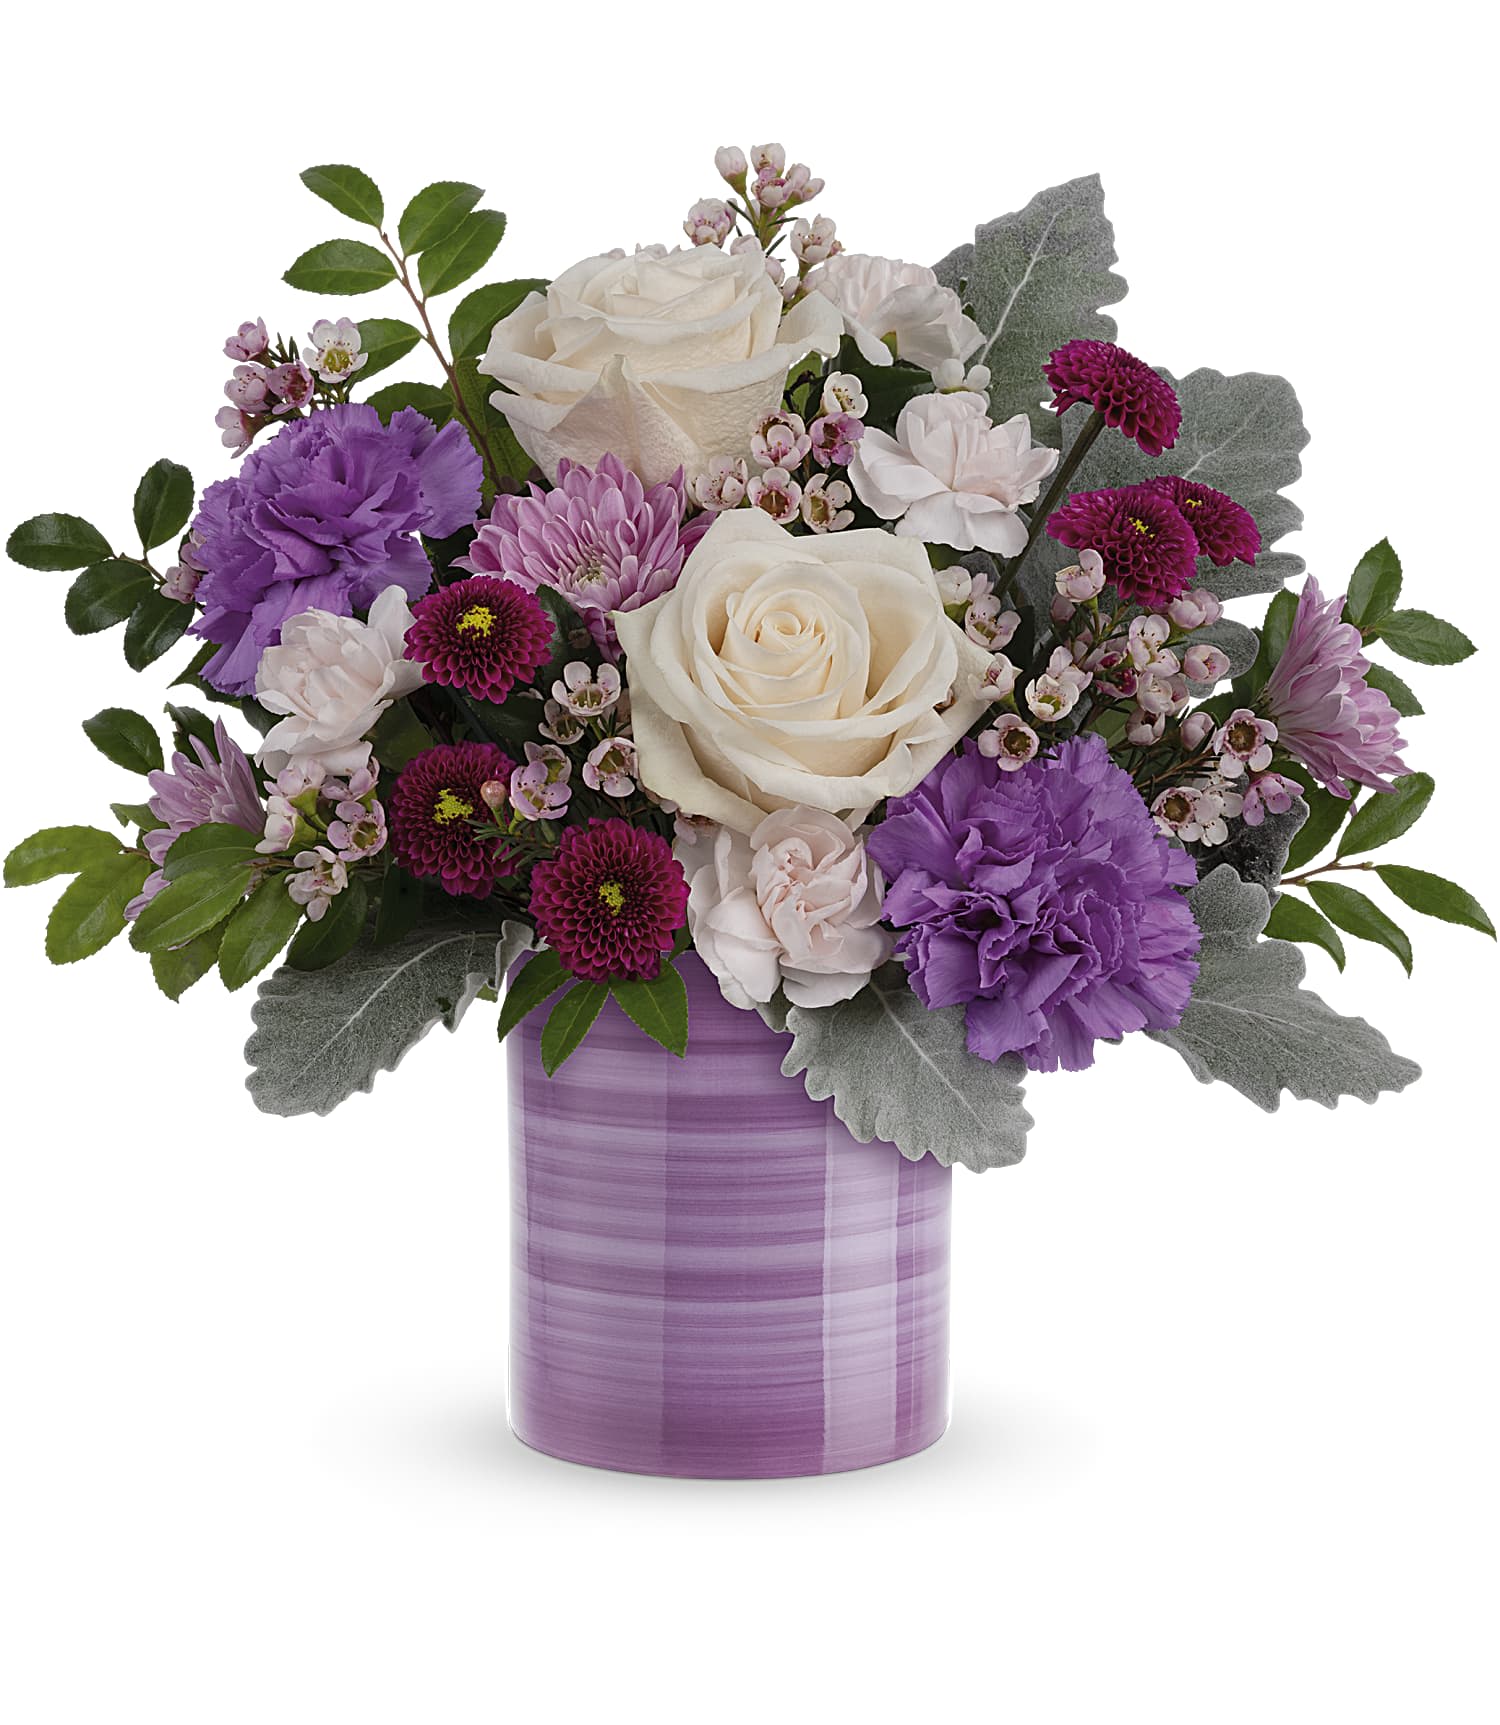 Serene Swirl - Swirling with hand-painted bands of soft lavender, this sweet ceramic keepsake vase makes a marvelous Mother's Day gift filled with a bouquet of creamy roses and purple blooms. T23M400a